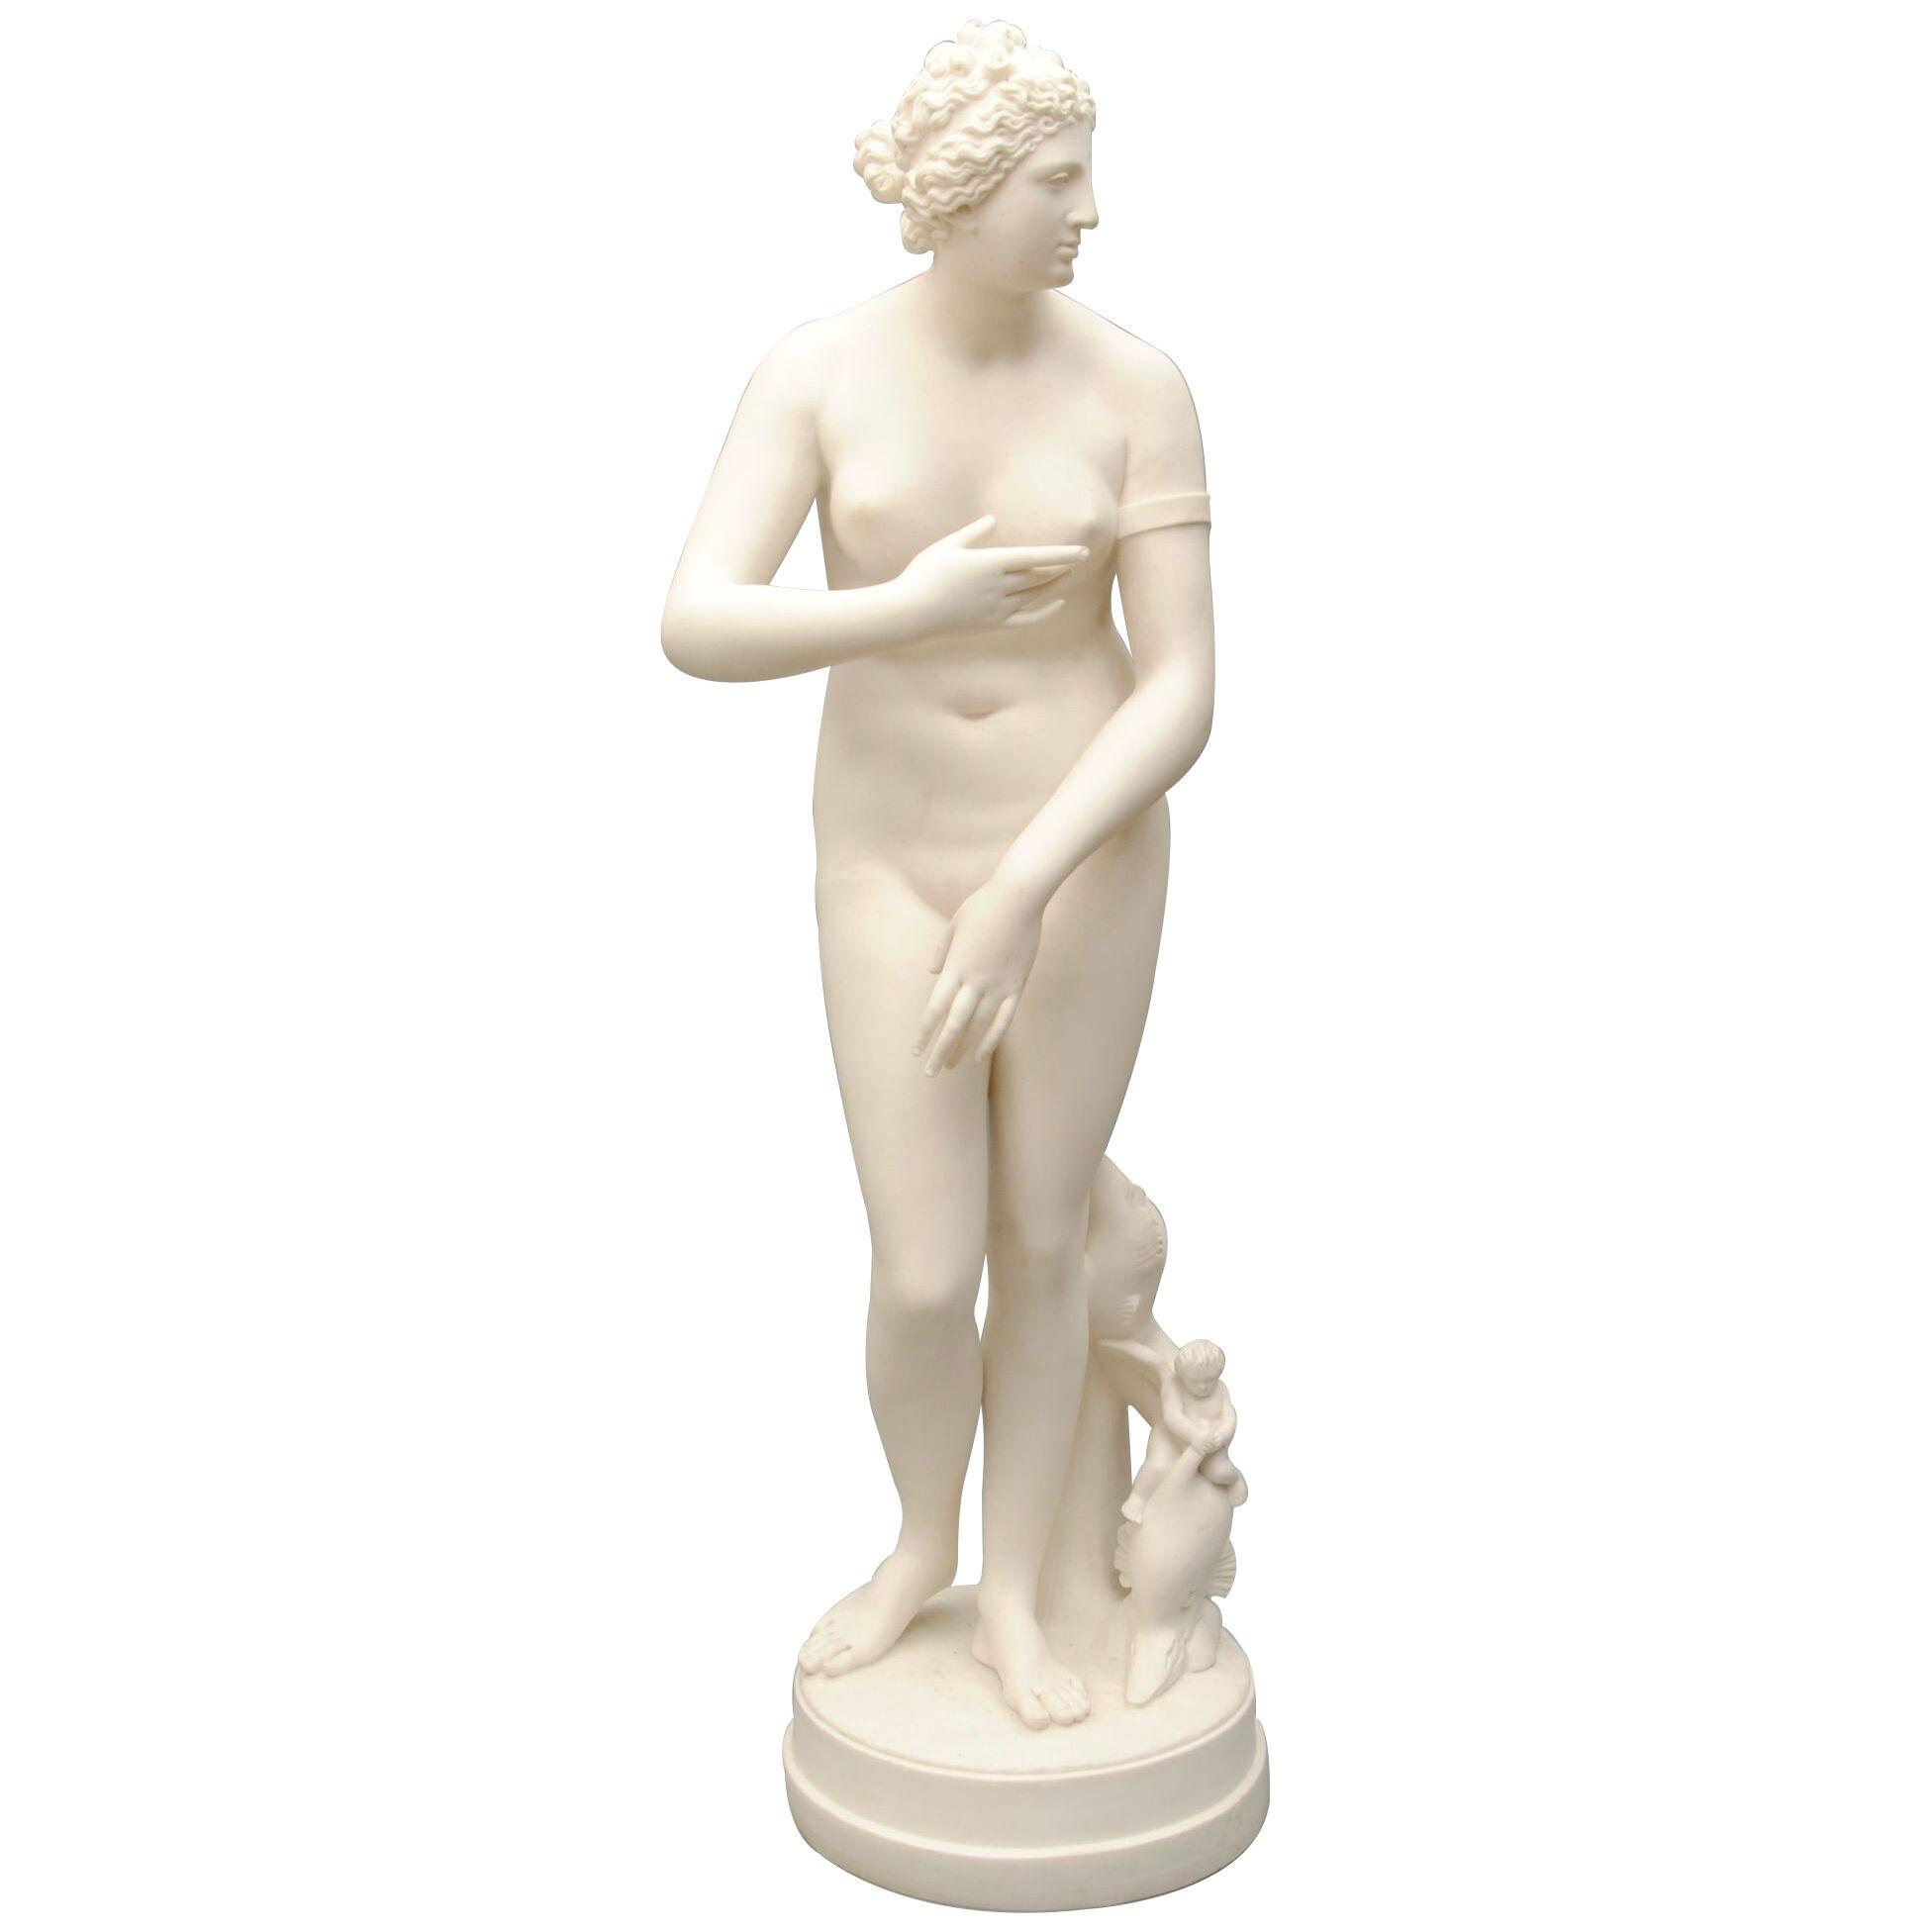 A LARGE MID 19TH CENTURY PARIAN FIGURE OF DIANA